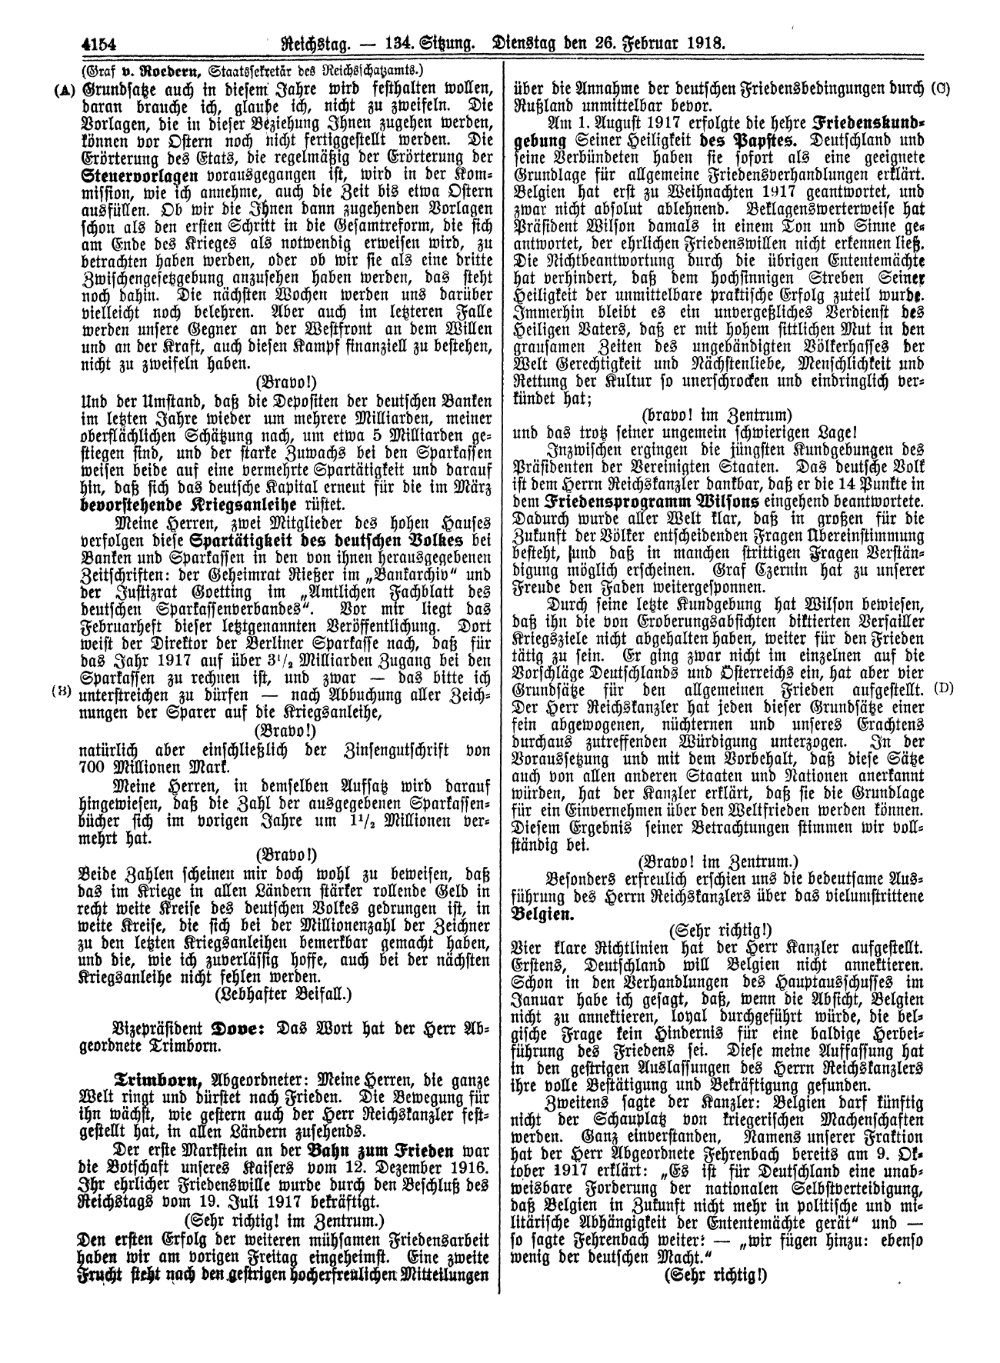 Scan of page 4154